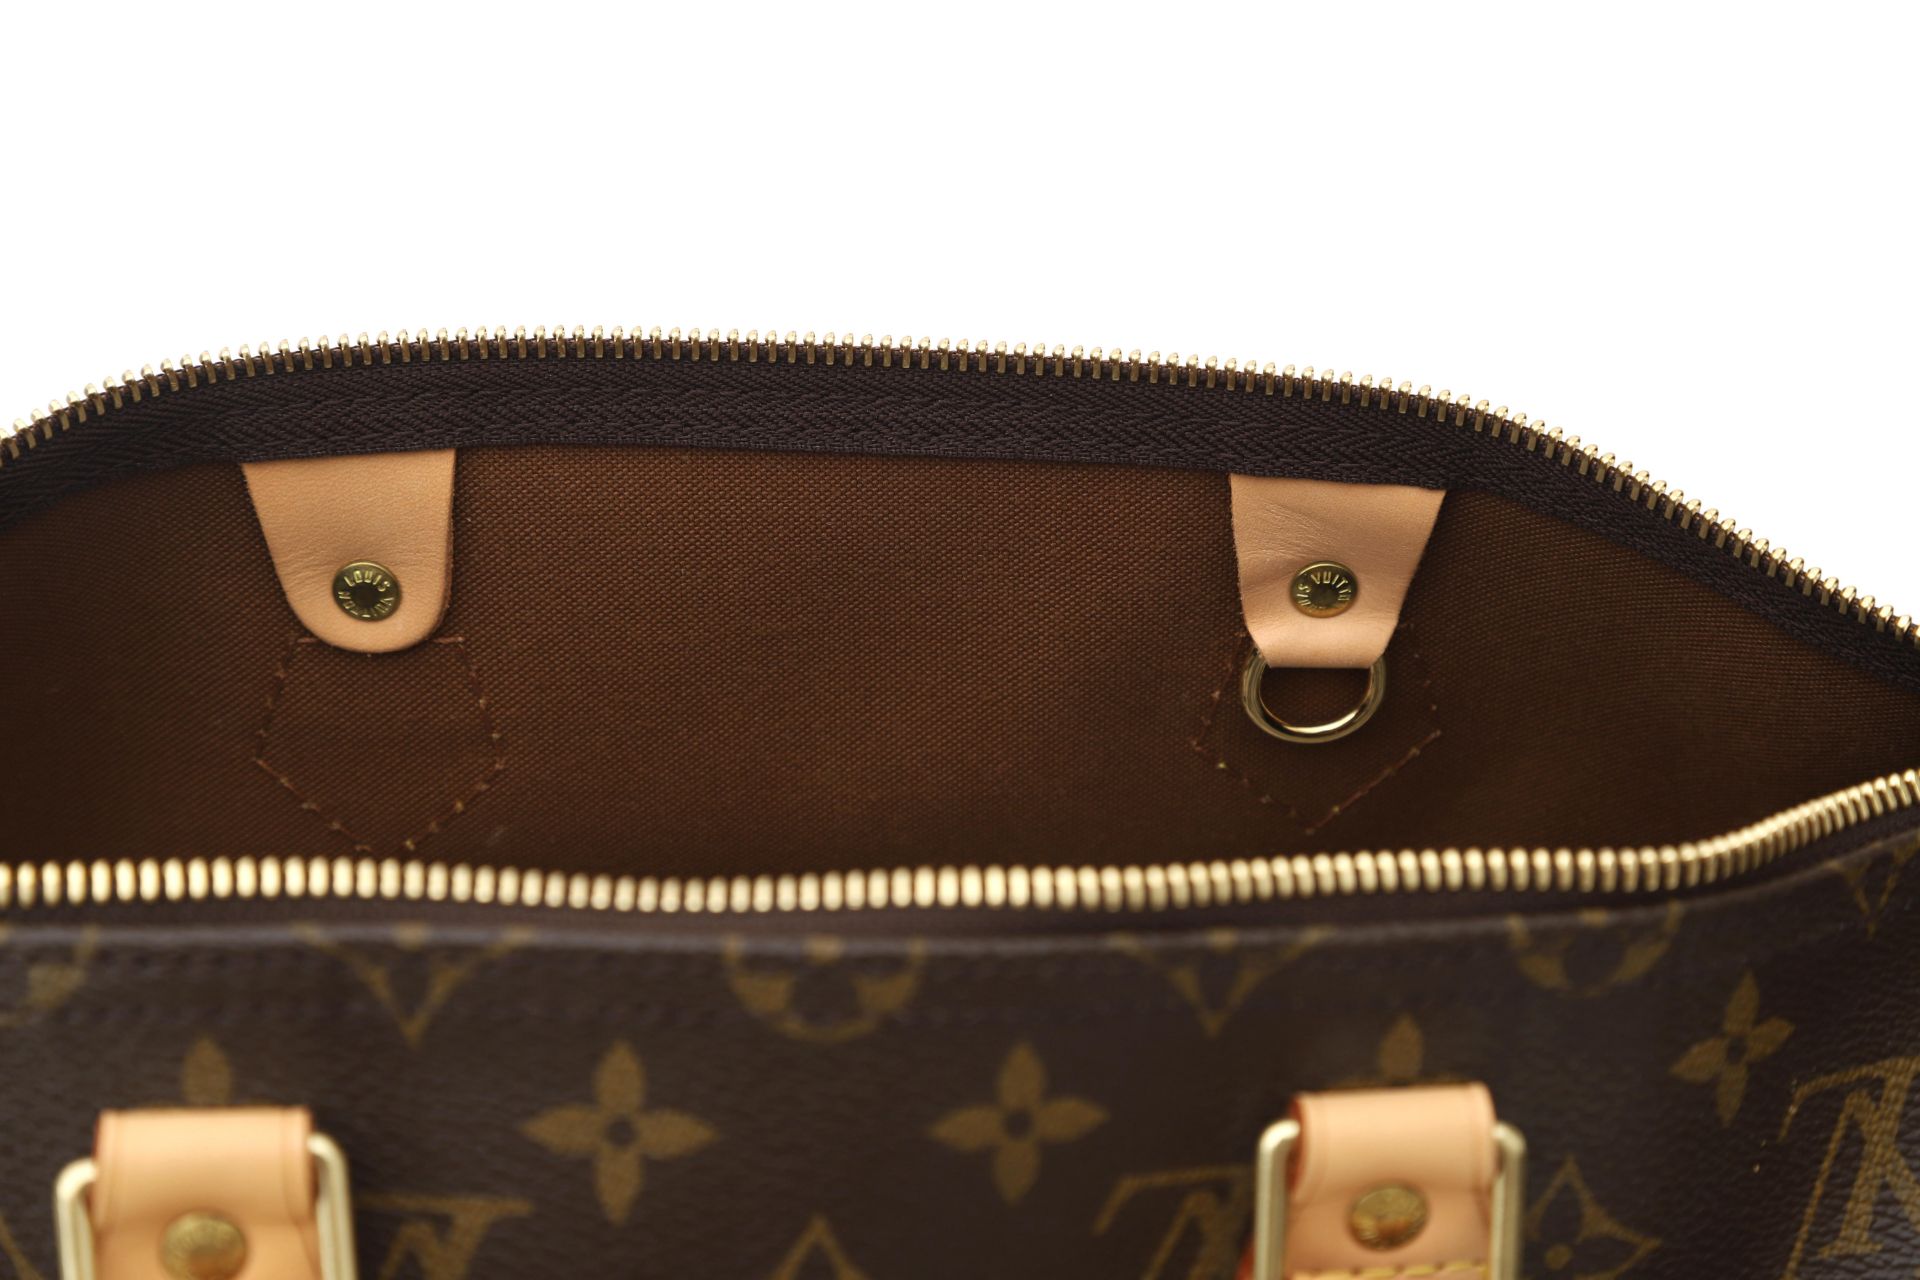 Vintage bag by Louis Vuitton model, Speedy 30 - Image 8 of 11